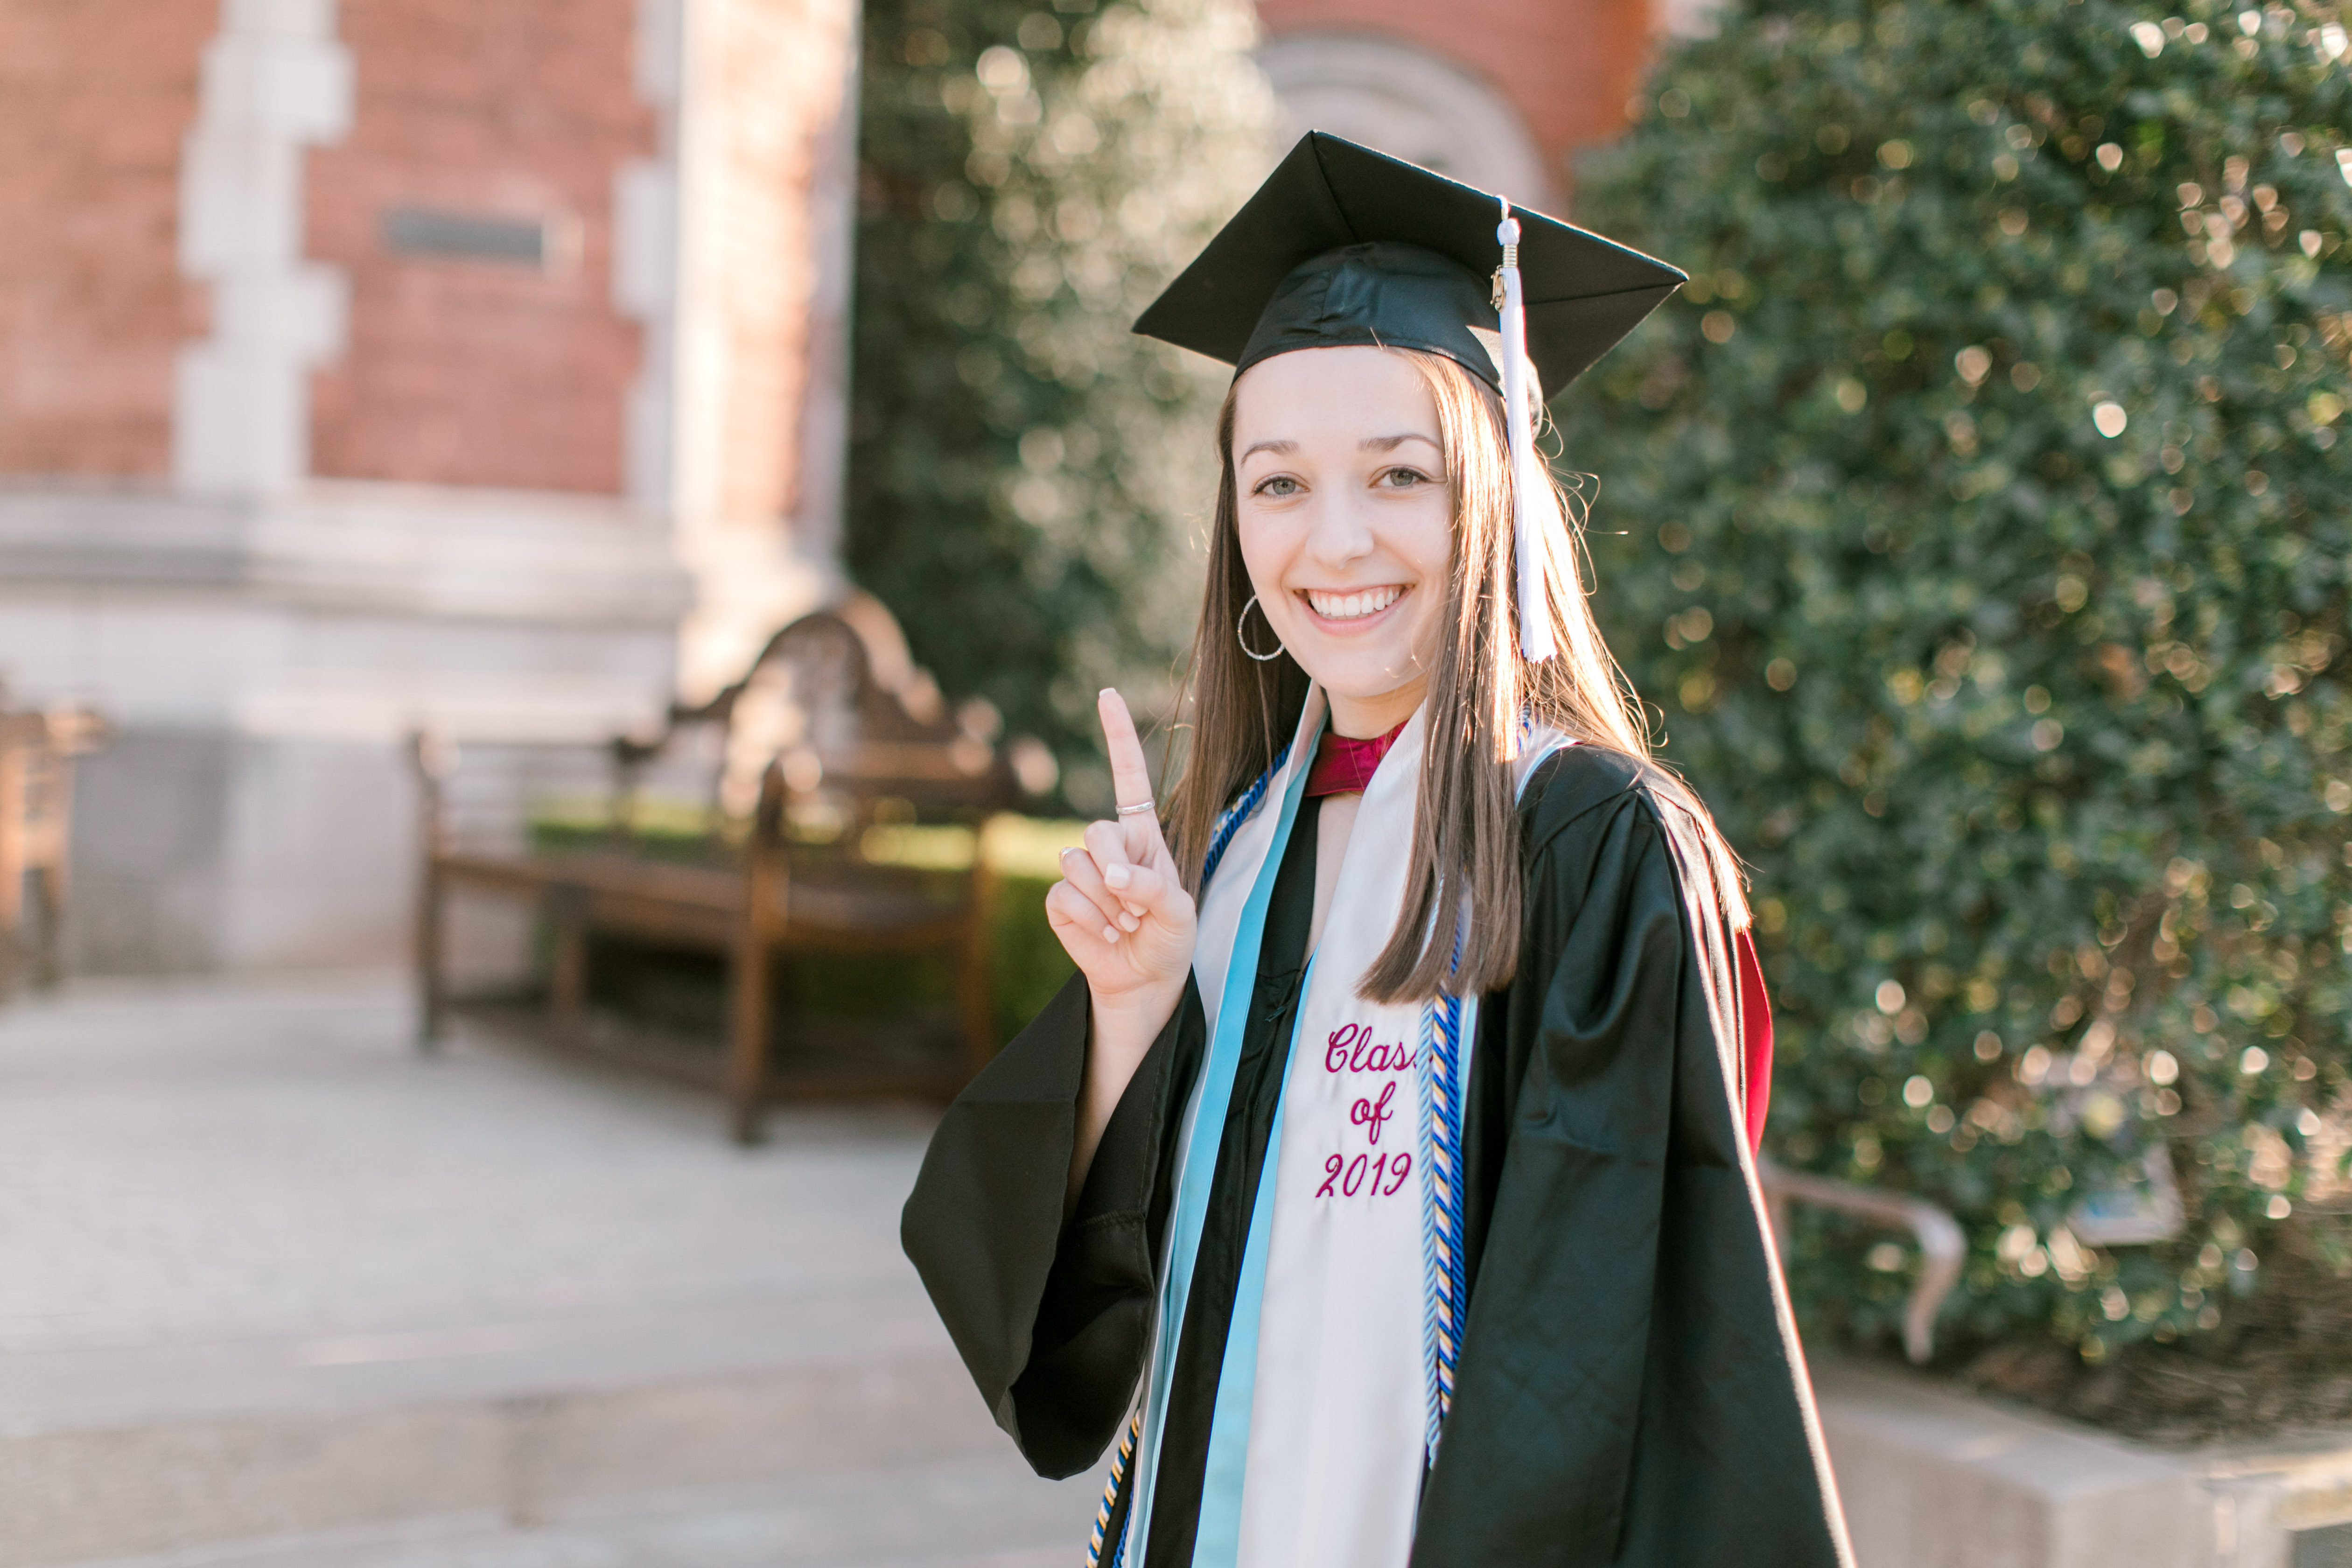 ou senior holds up a number 1 with her hand in cap and gown graduation regallia